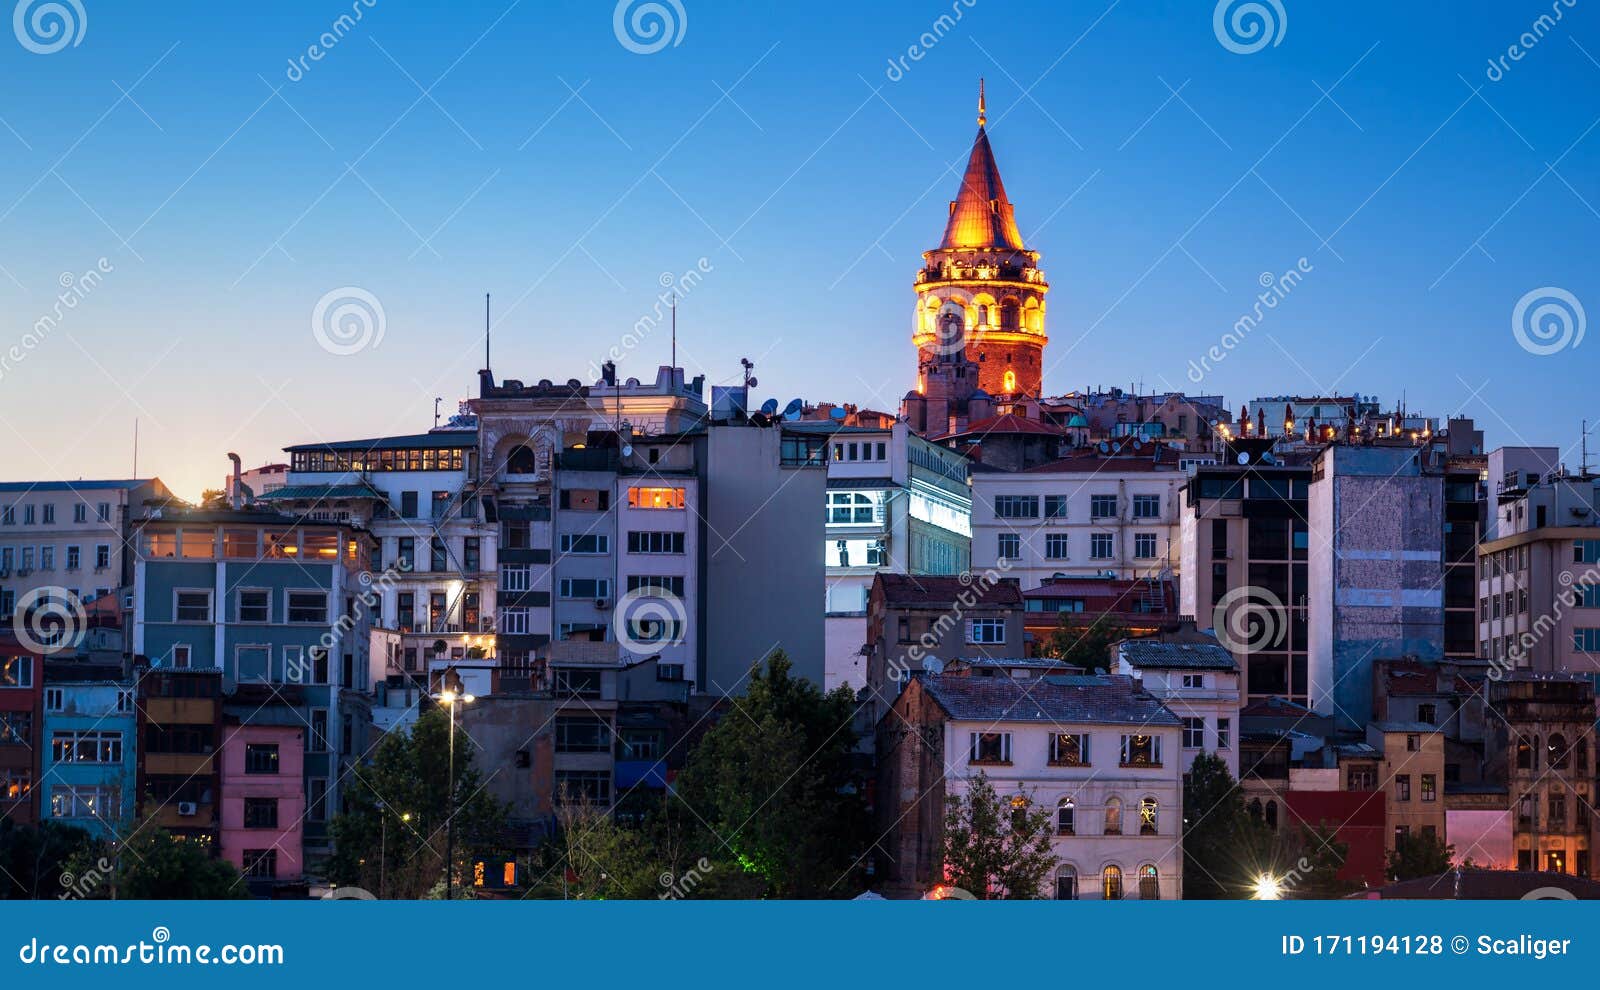 galata tower at night, istanbul, turkey. medieval galata tower is a famous landmark of istanbul city. panorama of beyoglu district